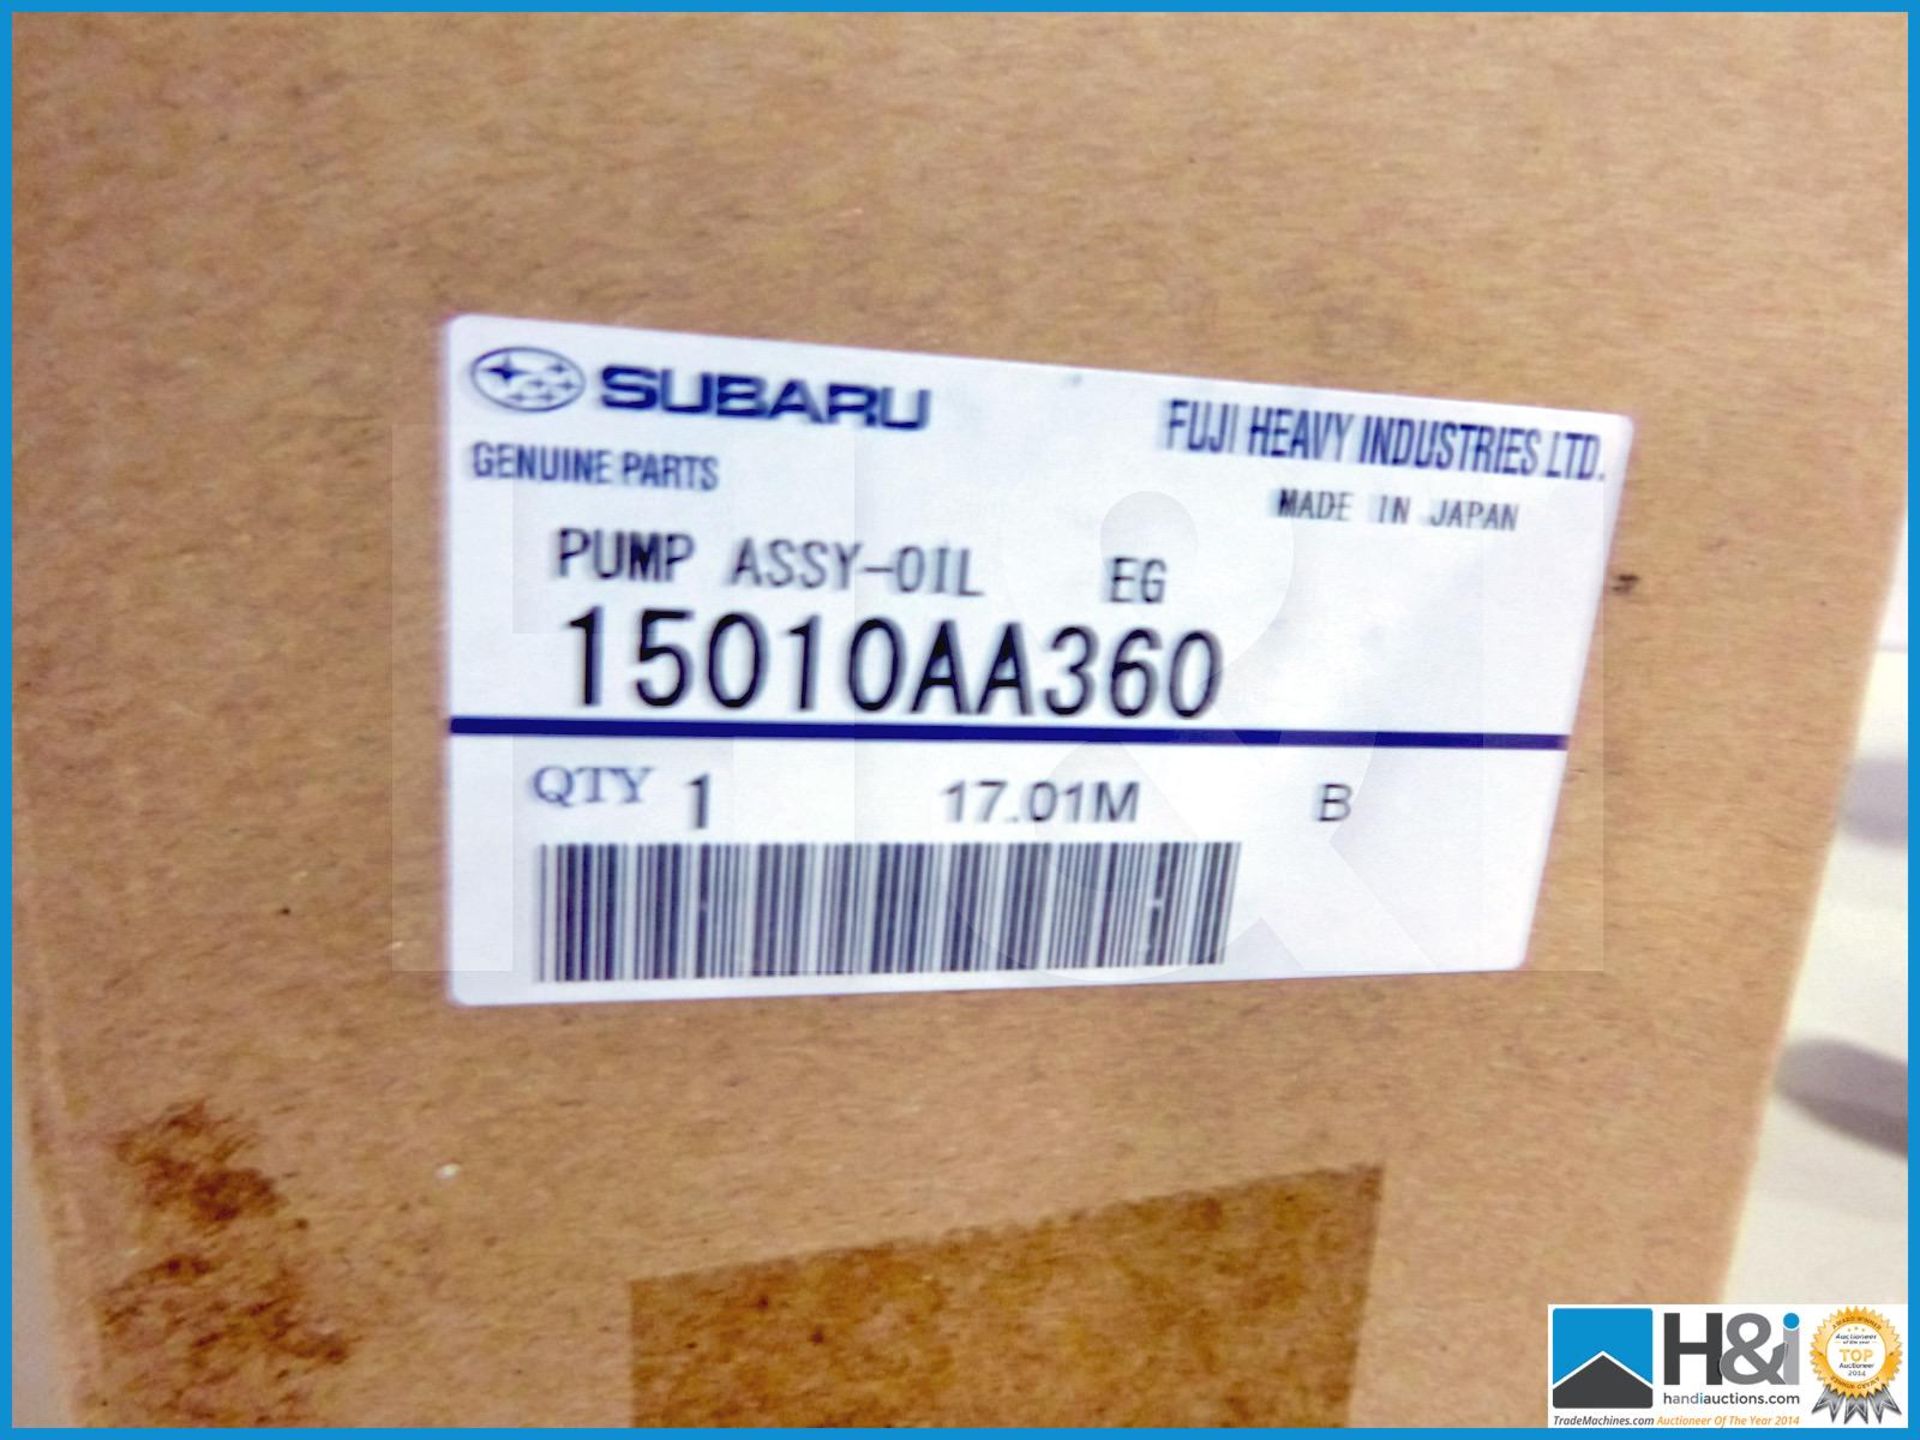 16 off Subaru EJ25 oil pump assembly 2008. Appx lot value over GBP 2,000-- MC:20004043 CILN:59 - Image 3 of 3